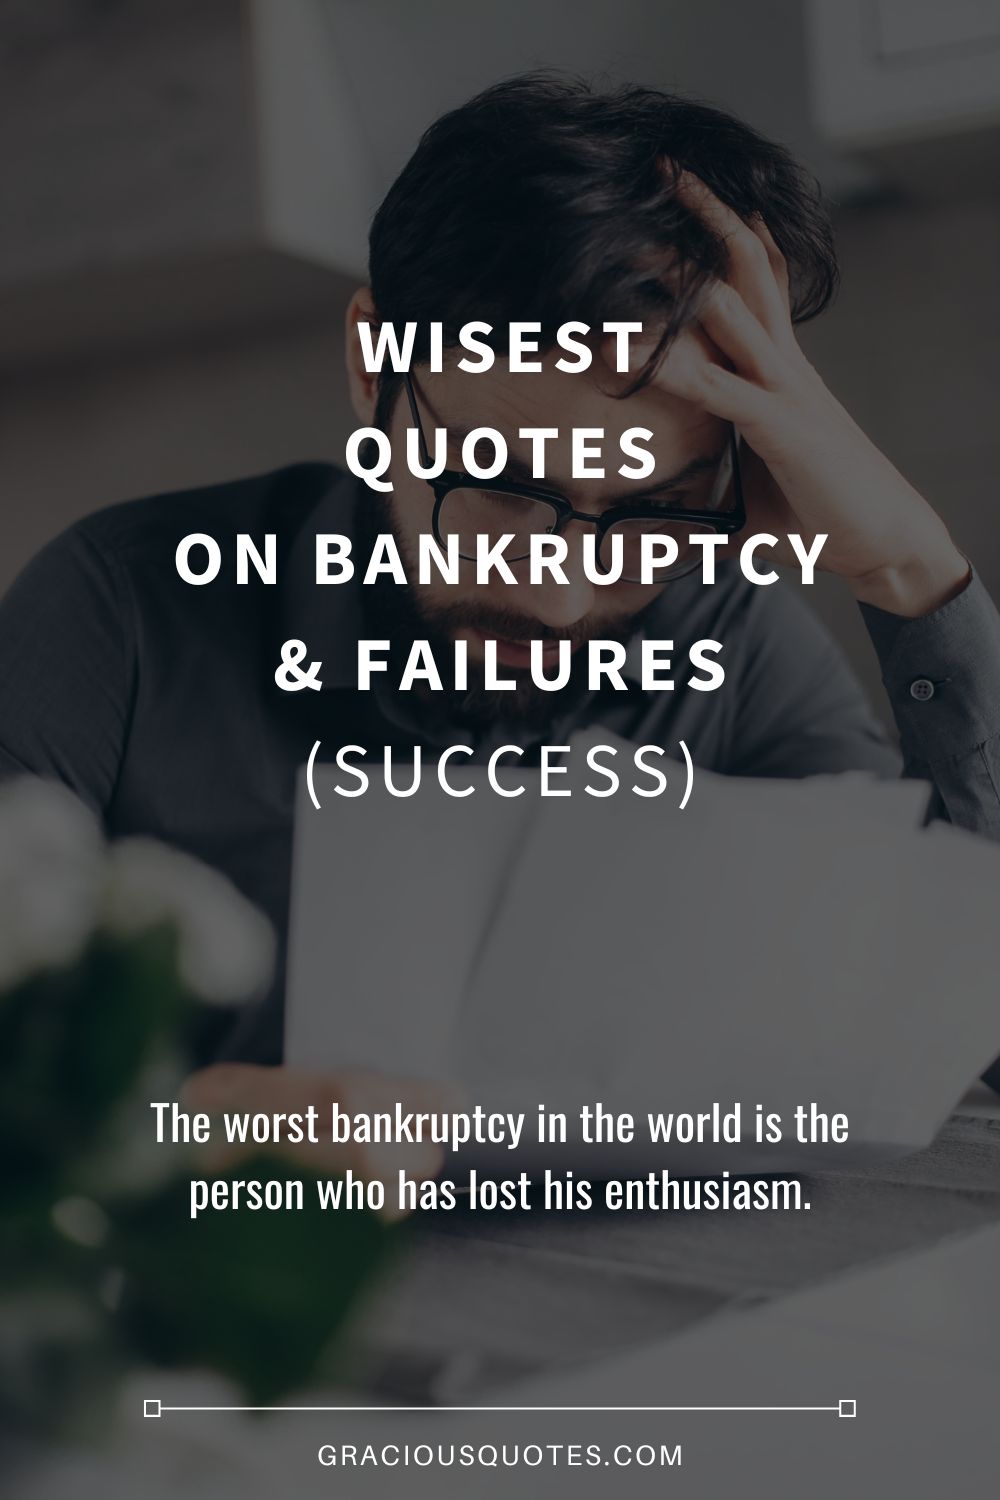 Wisest Quotes on Bankruptcy & Failures (SUCCESS) - Gracious Quotes